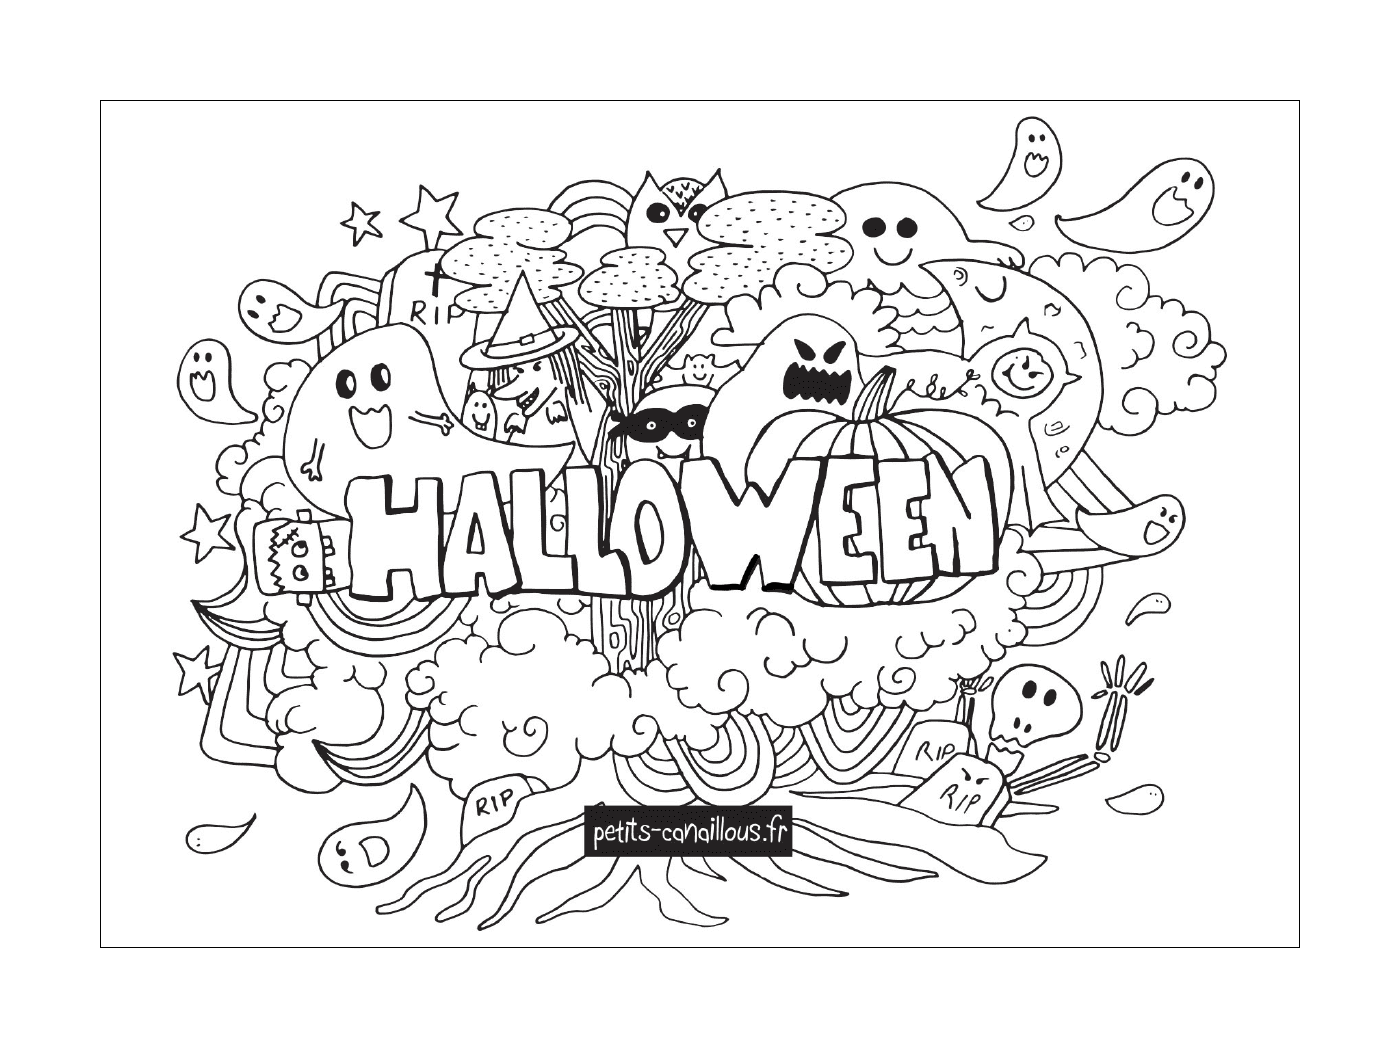  Halloween DoodleCity name (optional, probably does not need a translation) 